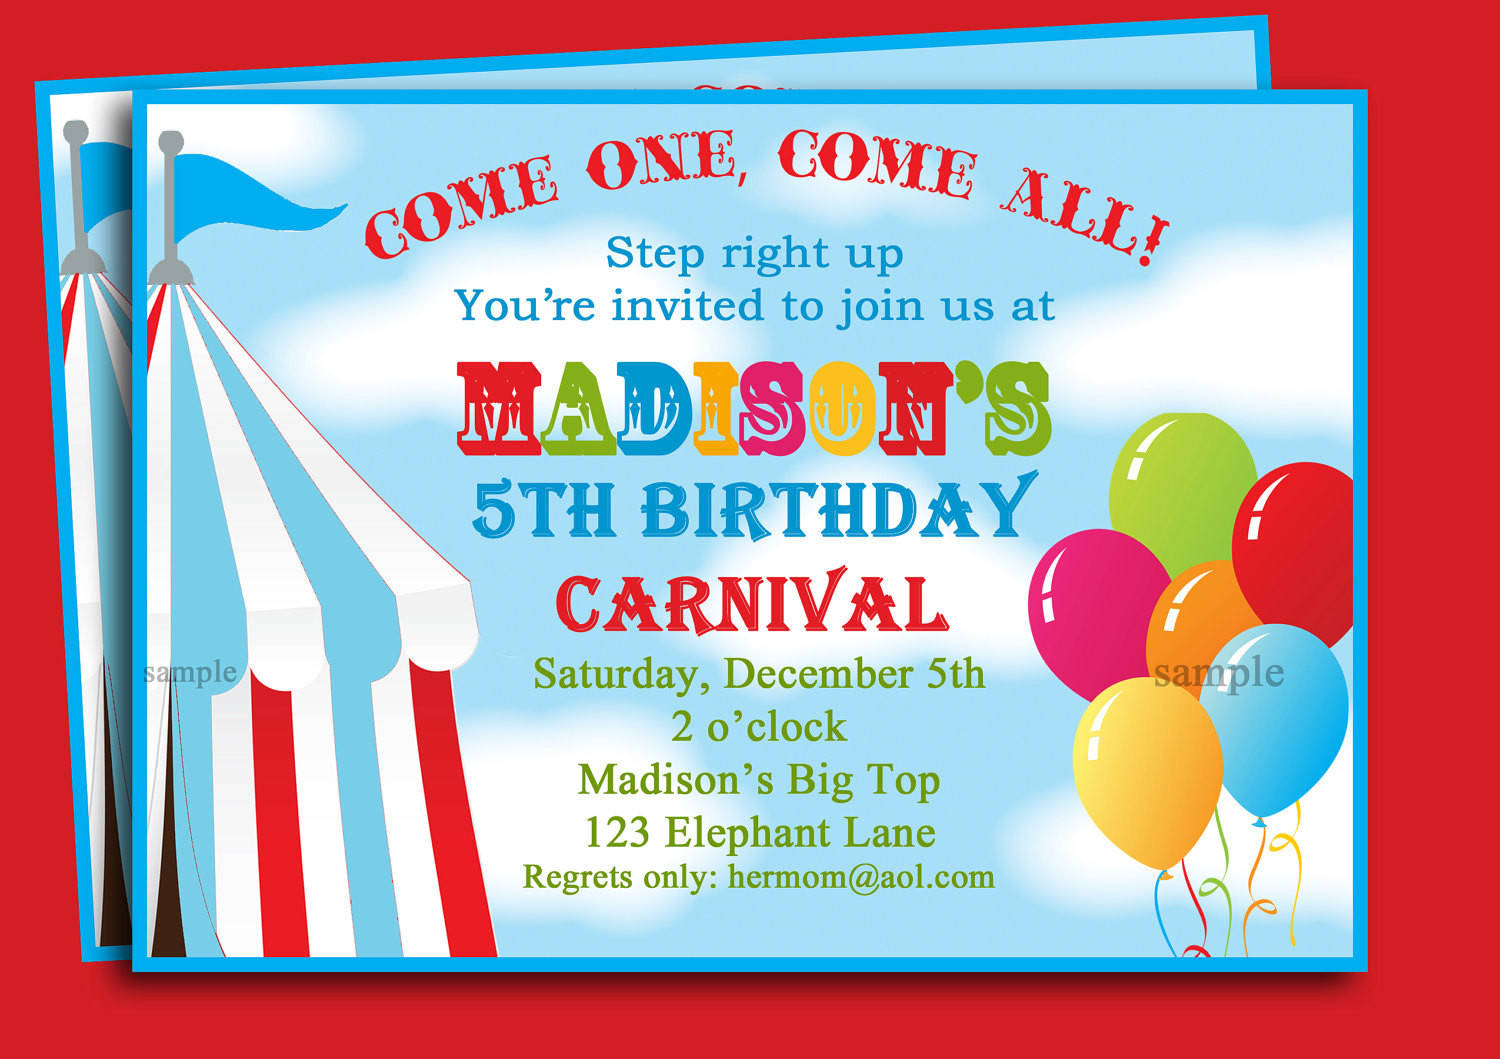 Free Printable Carnival Birthday Invitations
 Circus Carnival Birthday Invitation Printable or Printed with